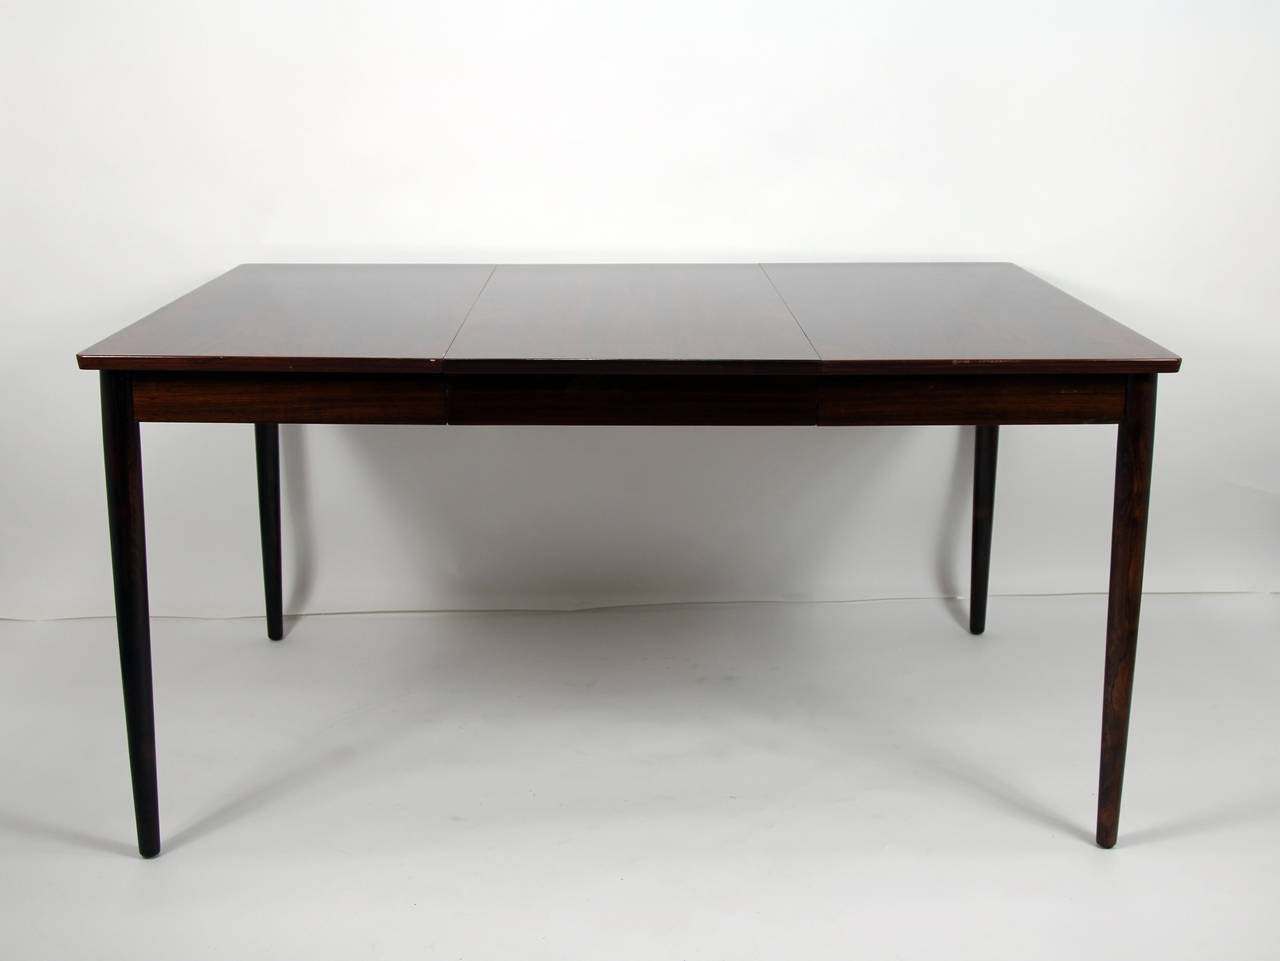 Svend Langkilde rosewood dining table. Danish modern rosewood table with two leaves. Designed by Svend Langkilde. Reduces down to card table side. Ideal for apartment.